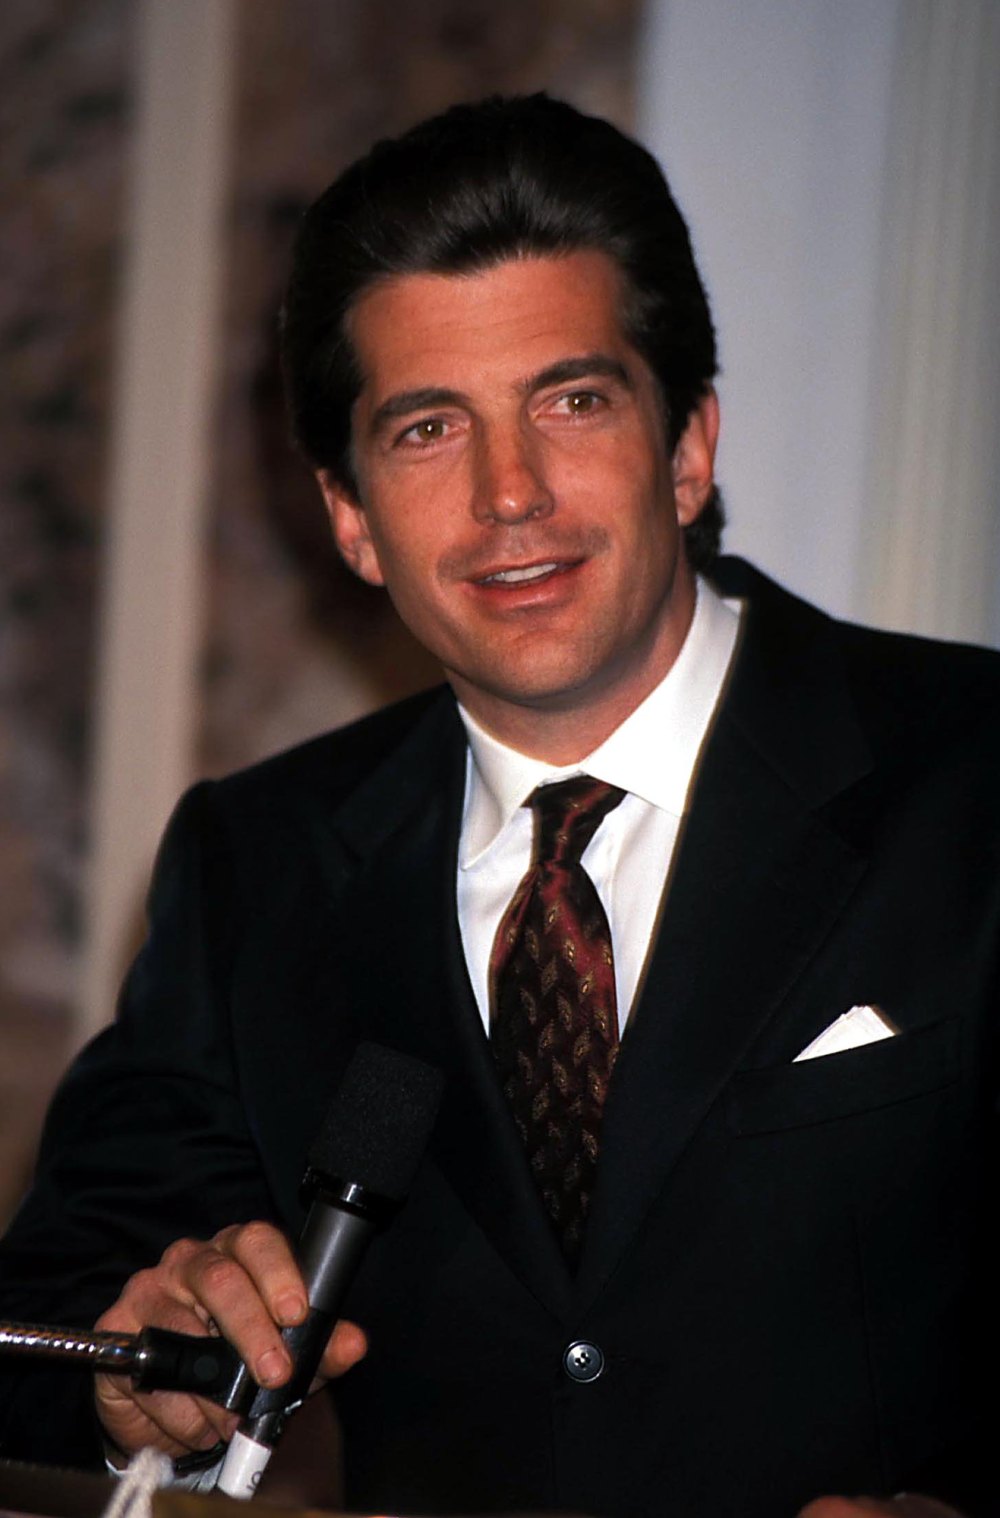 John F. Kennedy Jr.'s 'Life Goal' Was to Figure Out What Happened to His Father Before Untimely Death